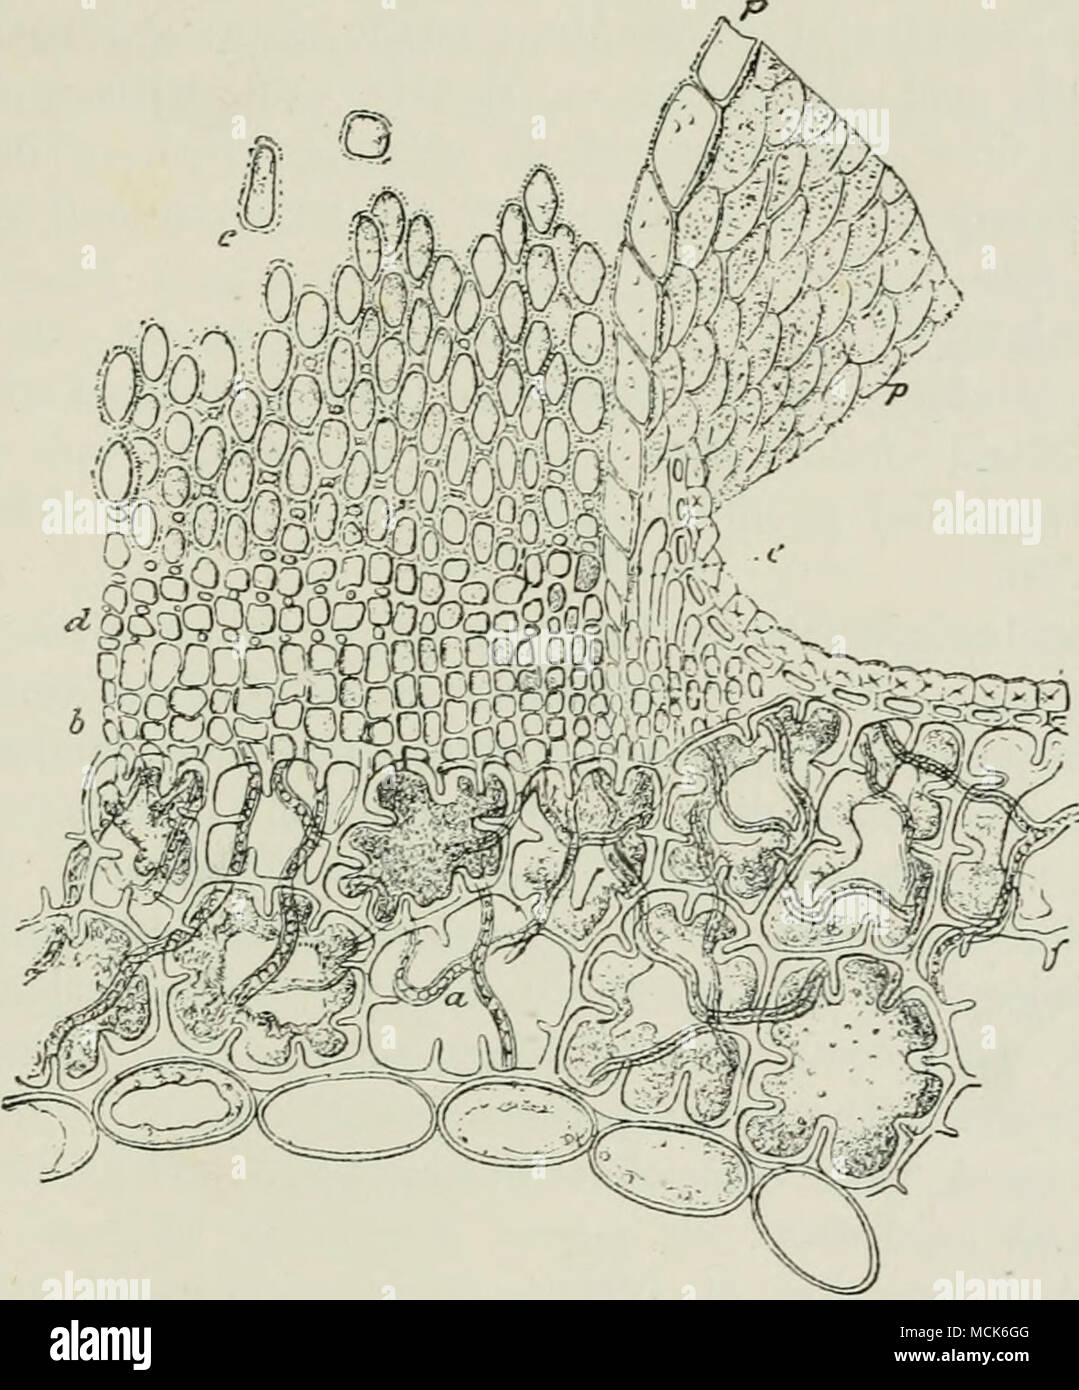 . Fig. 208.âPerUbrmiv.ni jiin'i (Coko-yioridm .â &lt;â¢ nirionix). Portion of an aecidium with basidia (b) giving off spores and intermediate cells (d); outside the peridiuni (p) other basidia (â ) with club-shaped ends force up the epidermis; II, the thick mycelium in the leaf-iiarenchyma. (After R. Hartig.) 20/tA; in form they are generally longish-oval, few being round; the spore-coat is moderately thick. Aecidiospores are capable of immediate germination, and produce ZJ/vrZo-patches on Scnecio by June. The uredospores have an average length of 28&quot;0/u, and breadth 15&quot;5ja; they are Stock Photo